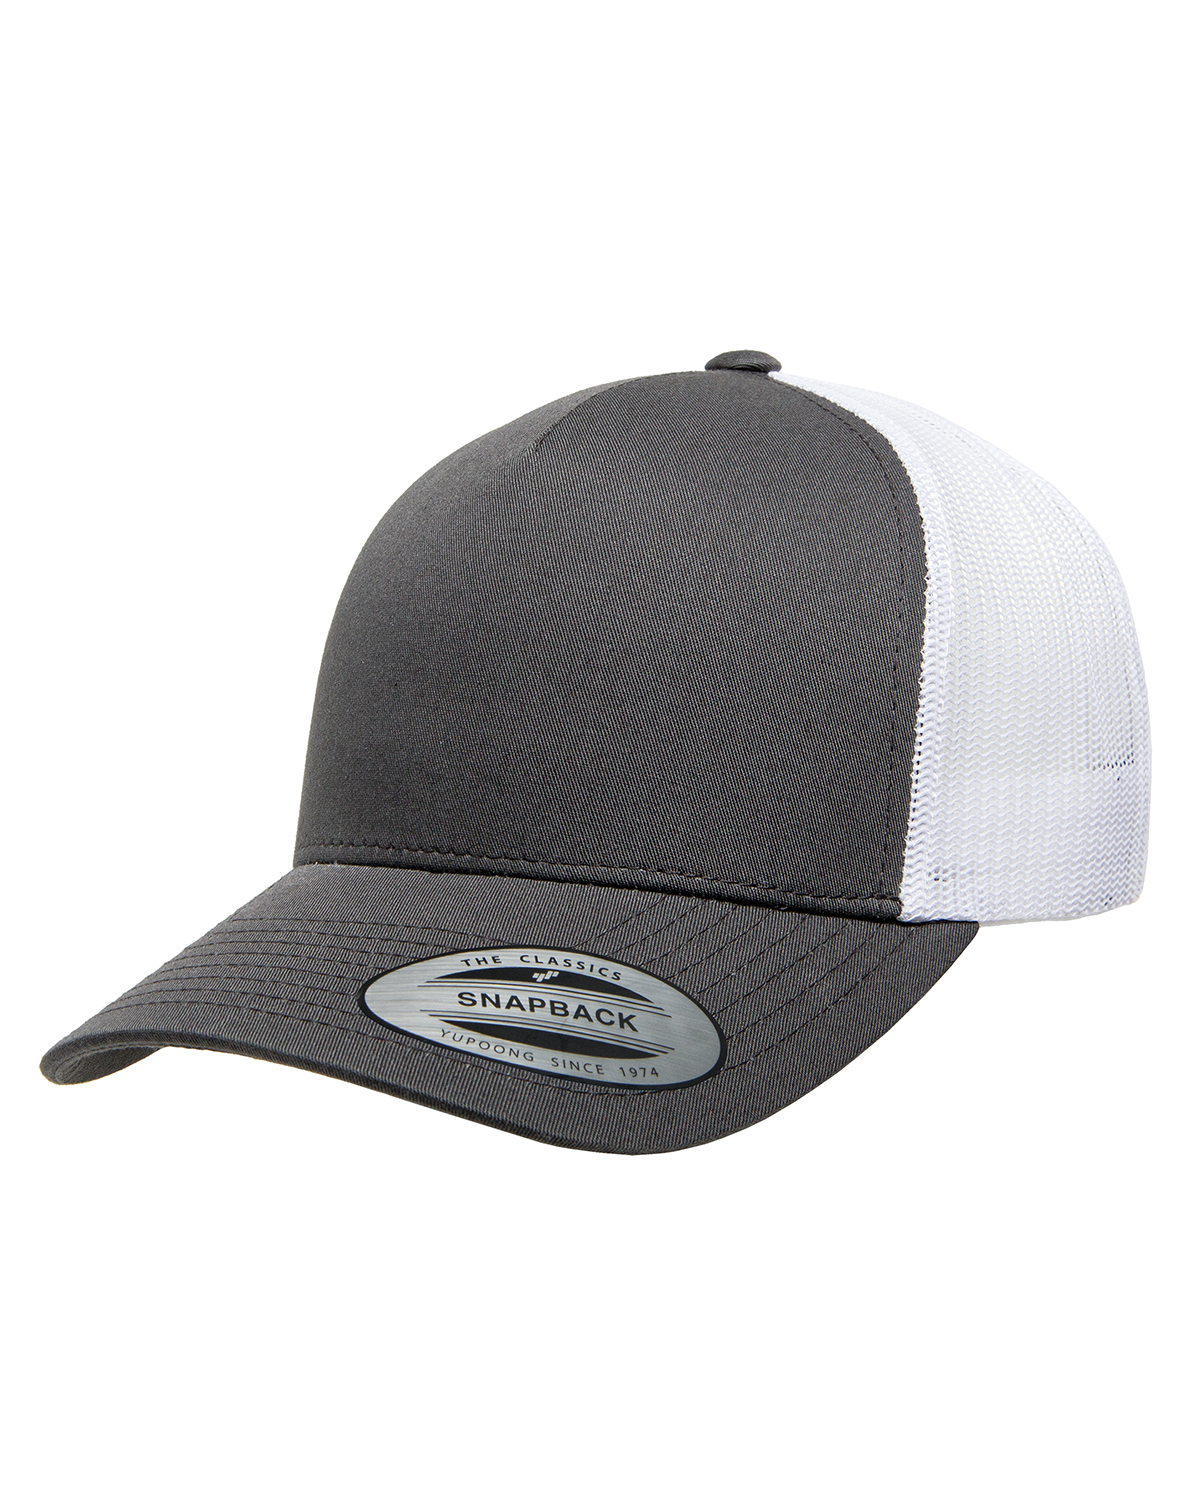 Yupoong 6506 Adult 5-Panel Retro Trucker Cap - Charcoal/White